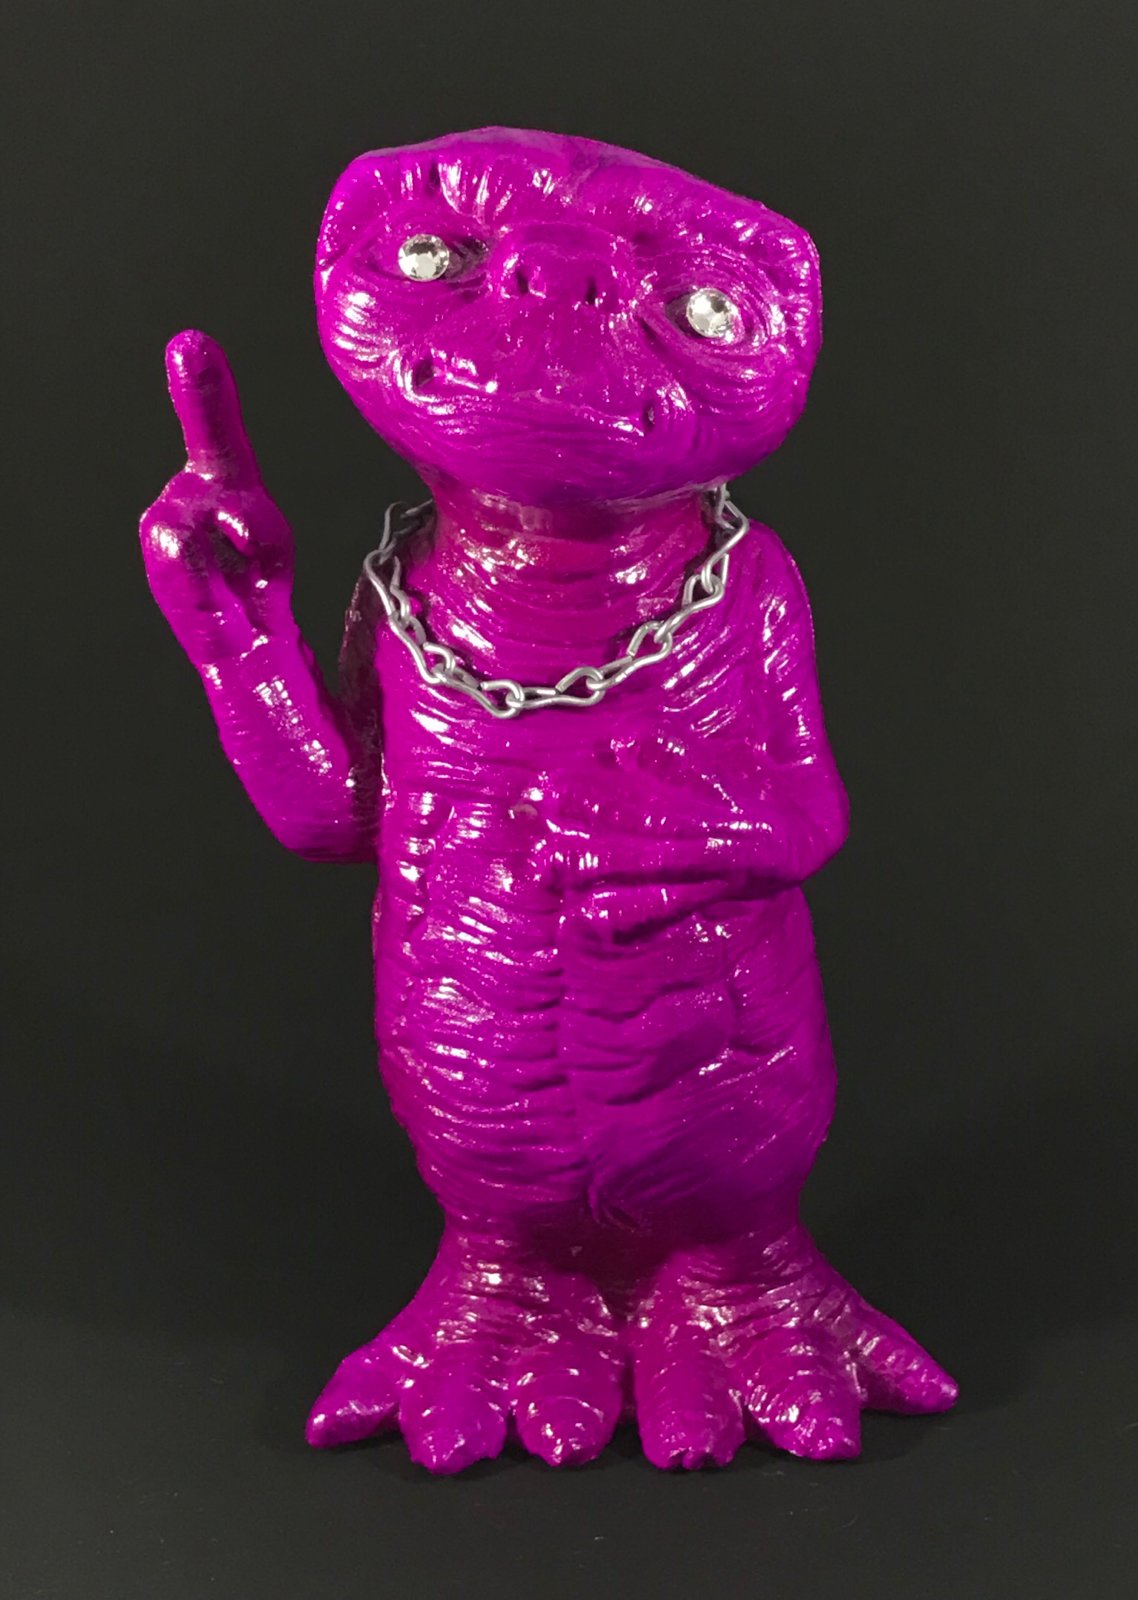 Fluorescent purple ET with rhinestone eyes, silver chain and metal flake